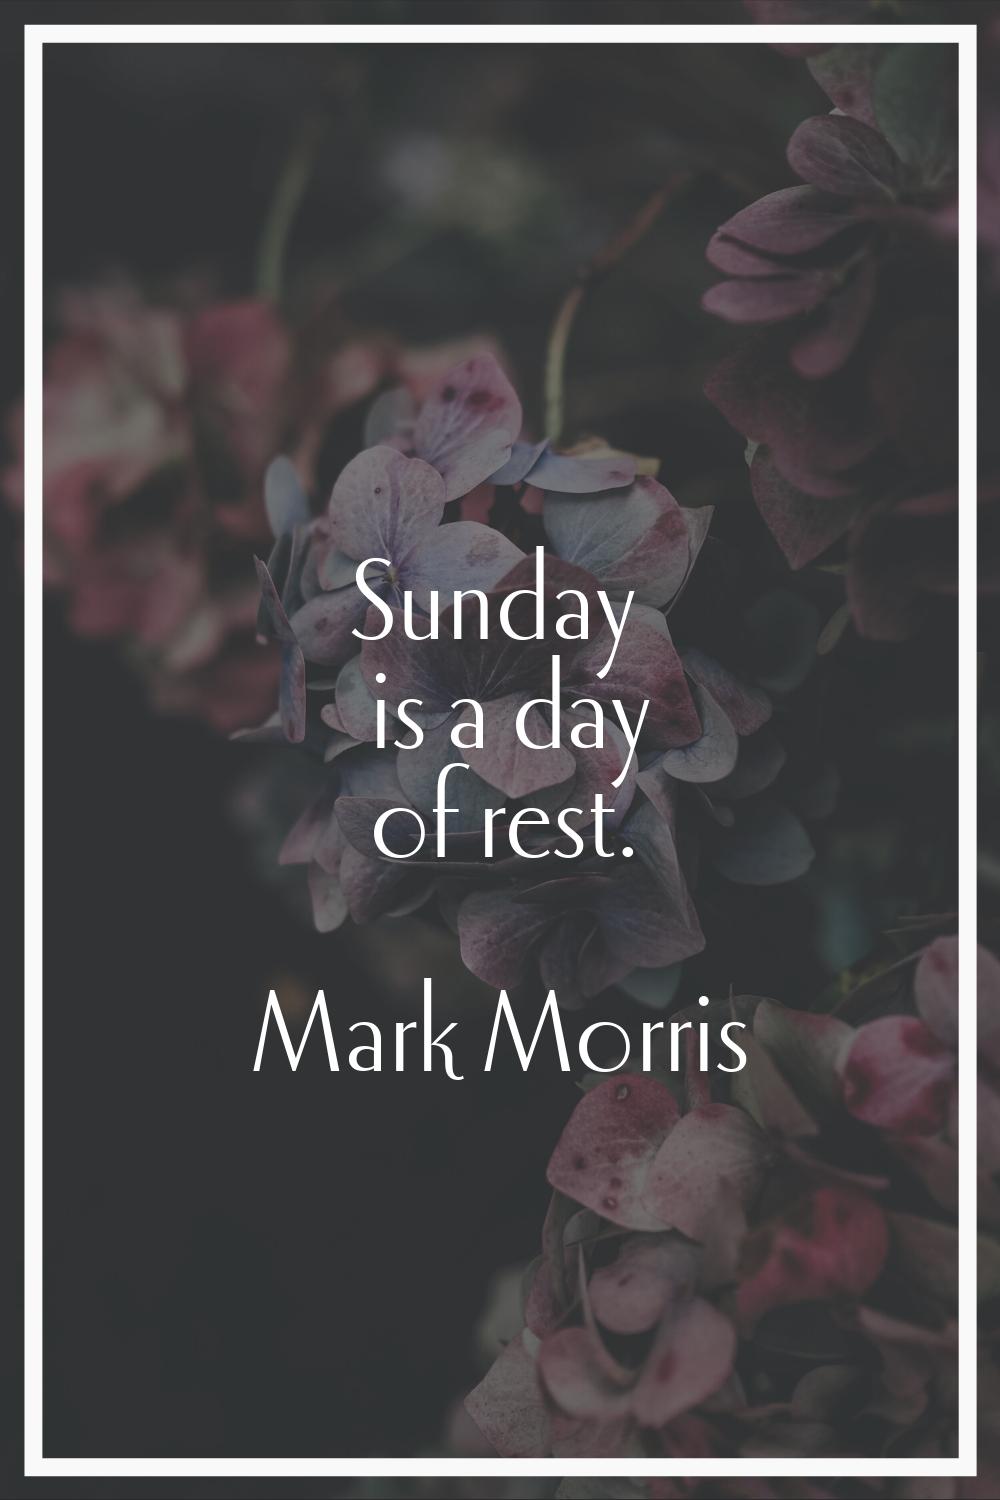 Sunday is a day of rest.